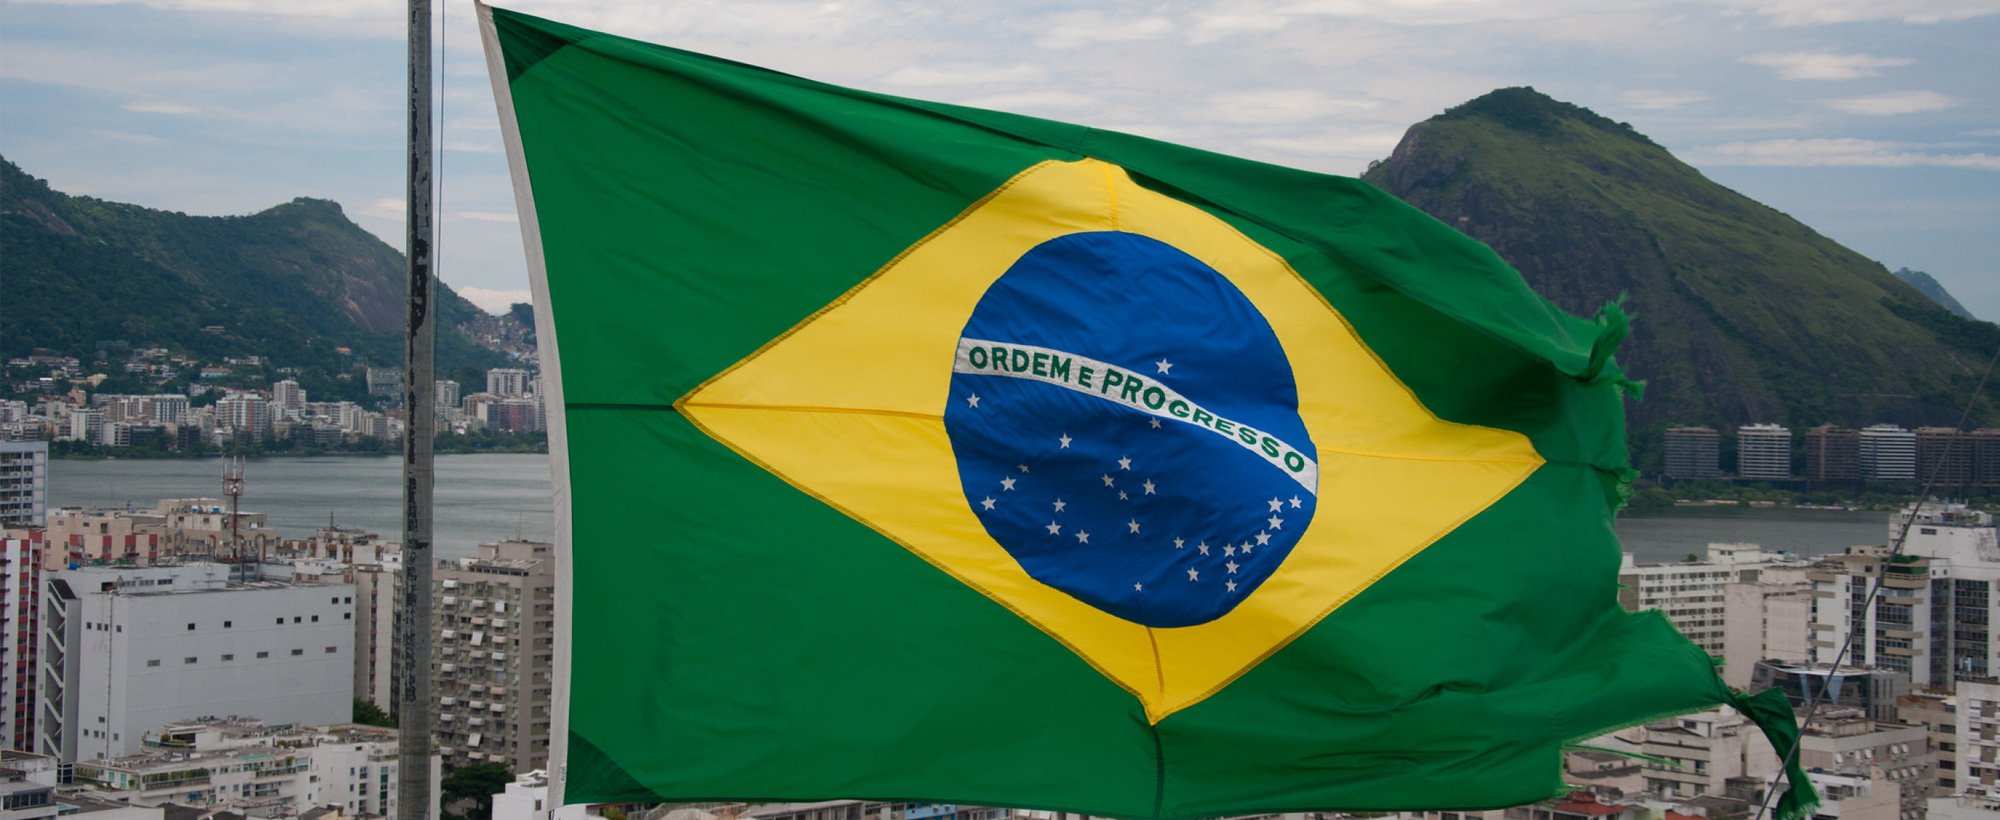 Brazil's flag flies on top of a building